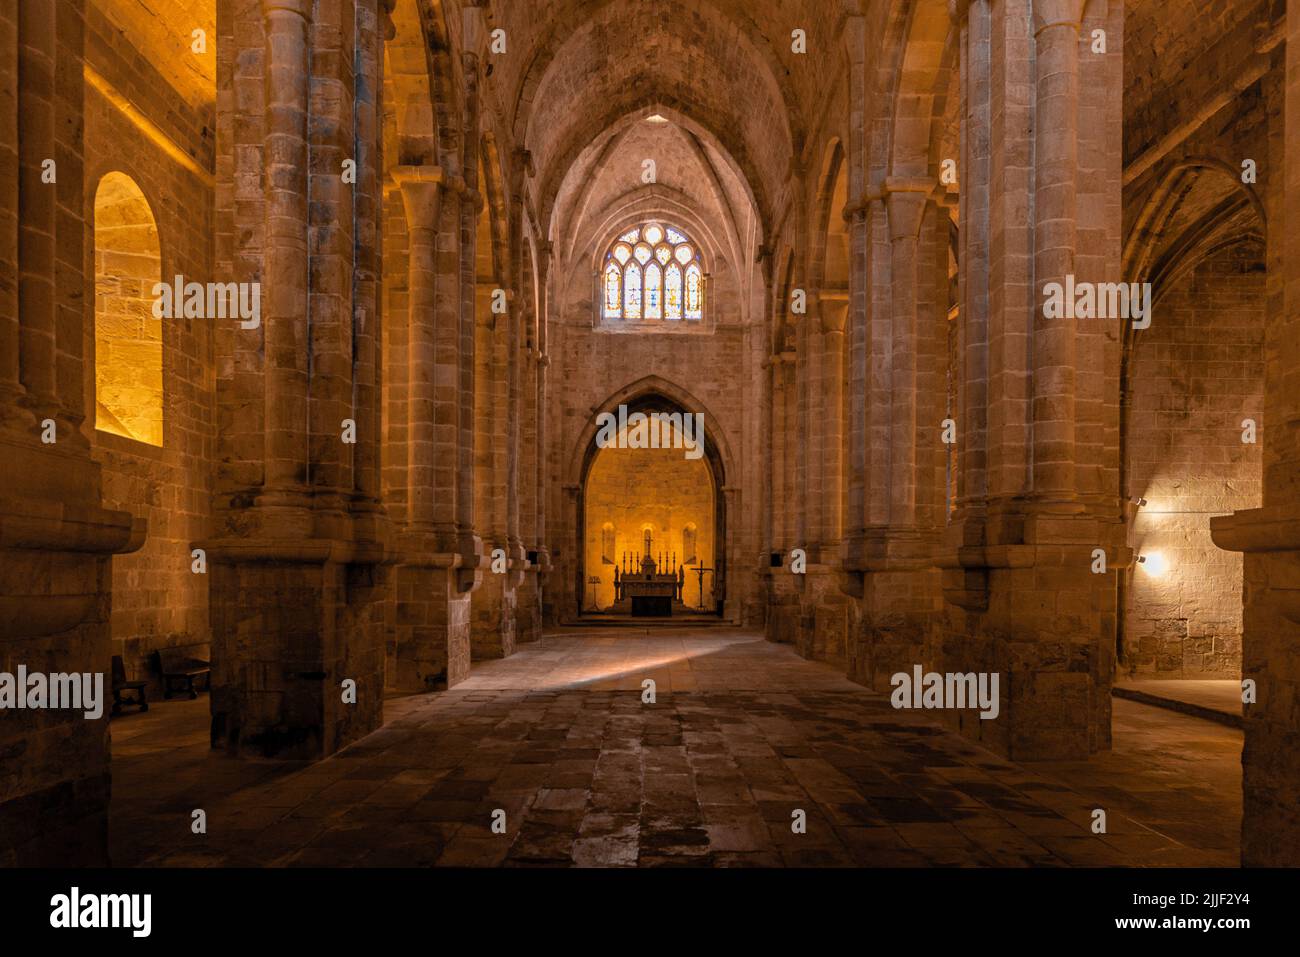 The nave of the Frontfroide Abbey, France, with both natural and artificial lighting and no people Stock Photo